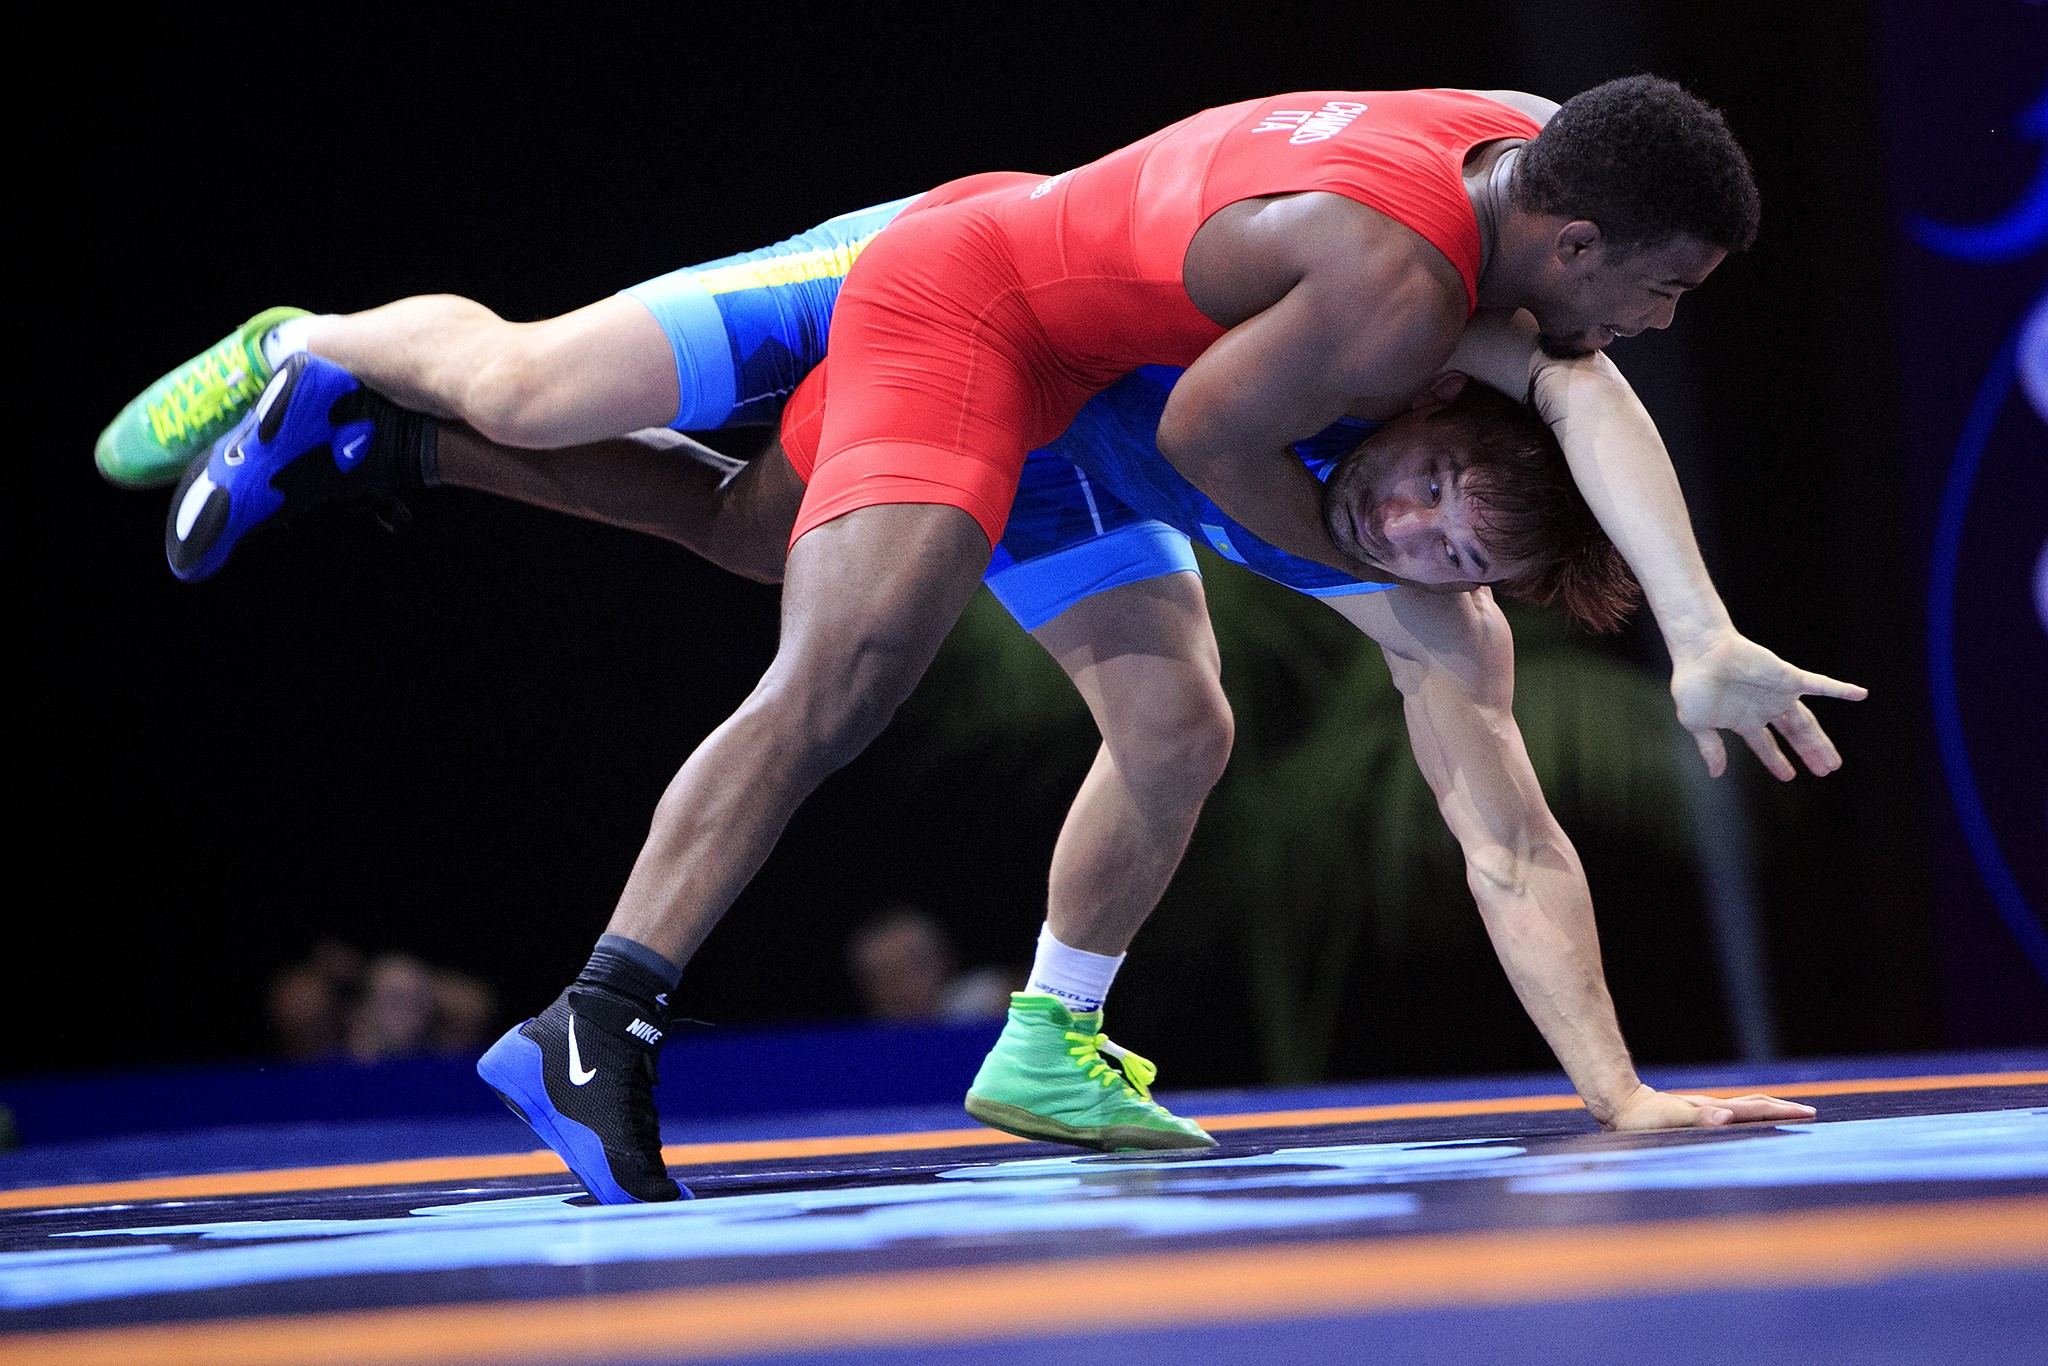 Italian Frank Chamizo, the Olympic bronze medallist and 2015 world champion at 65kg, claimed his country's first crown of the Championships by winning the 70kg division ©UWW